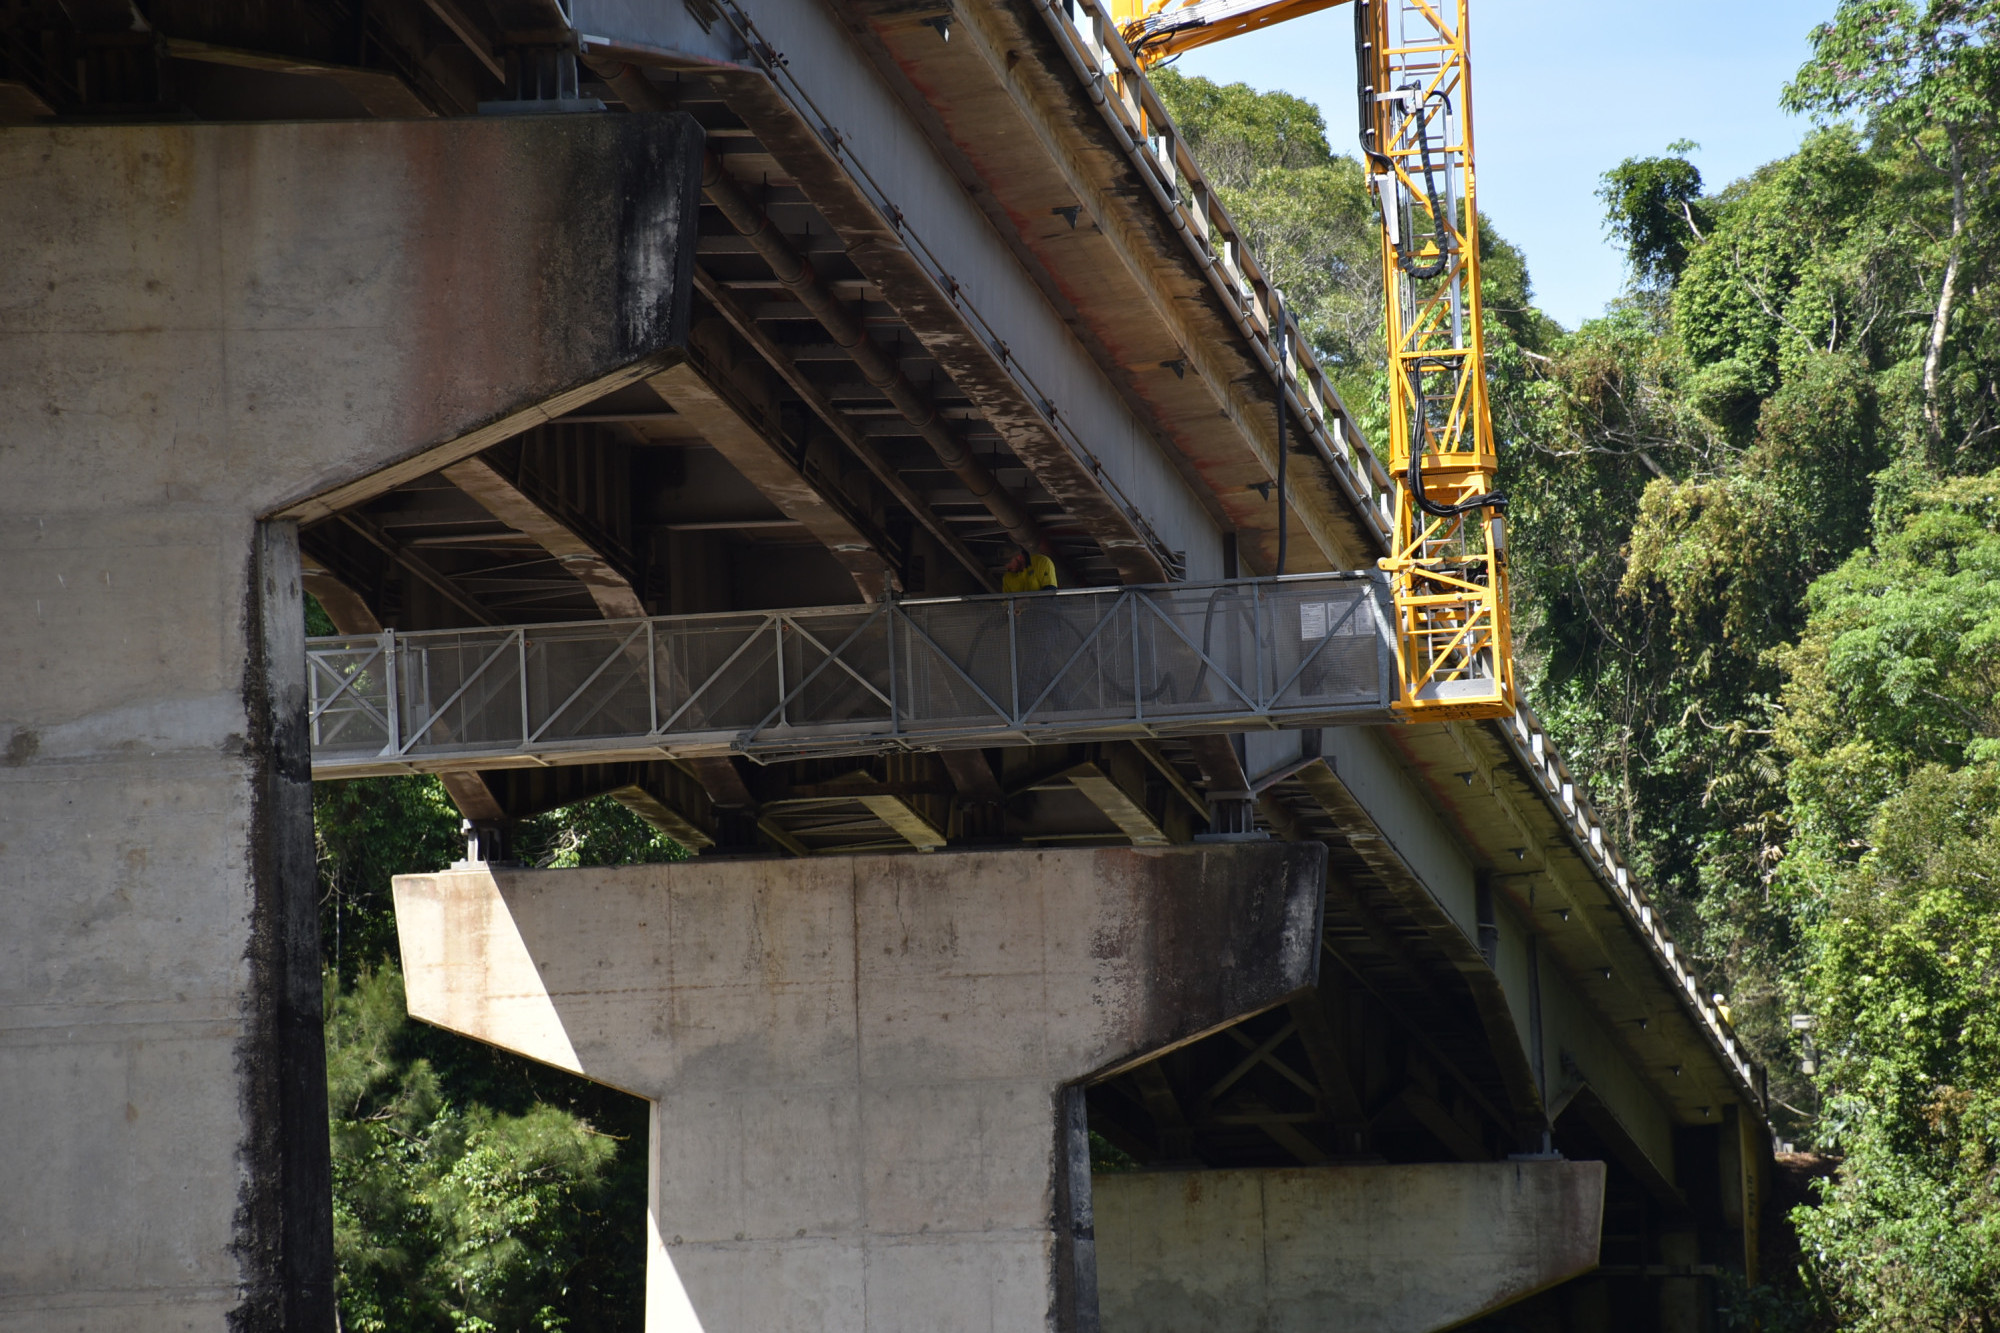 TMR staff carrying out inspections underneath the Barron River Bridge.